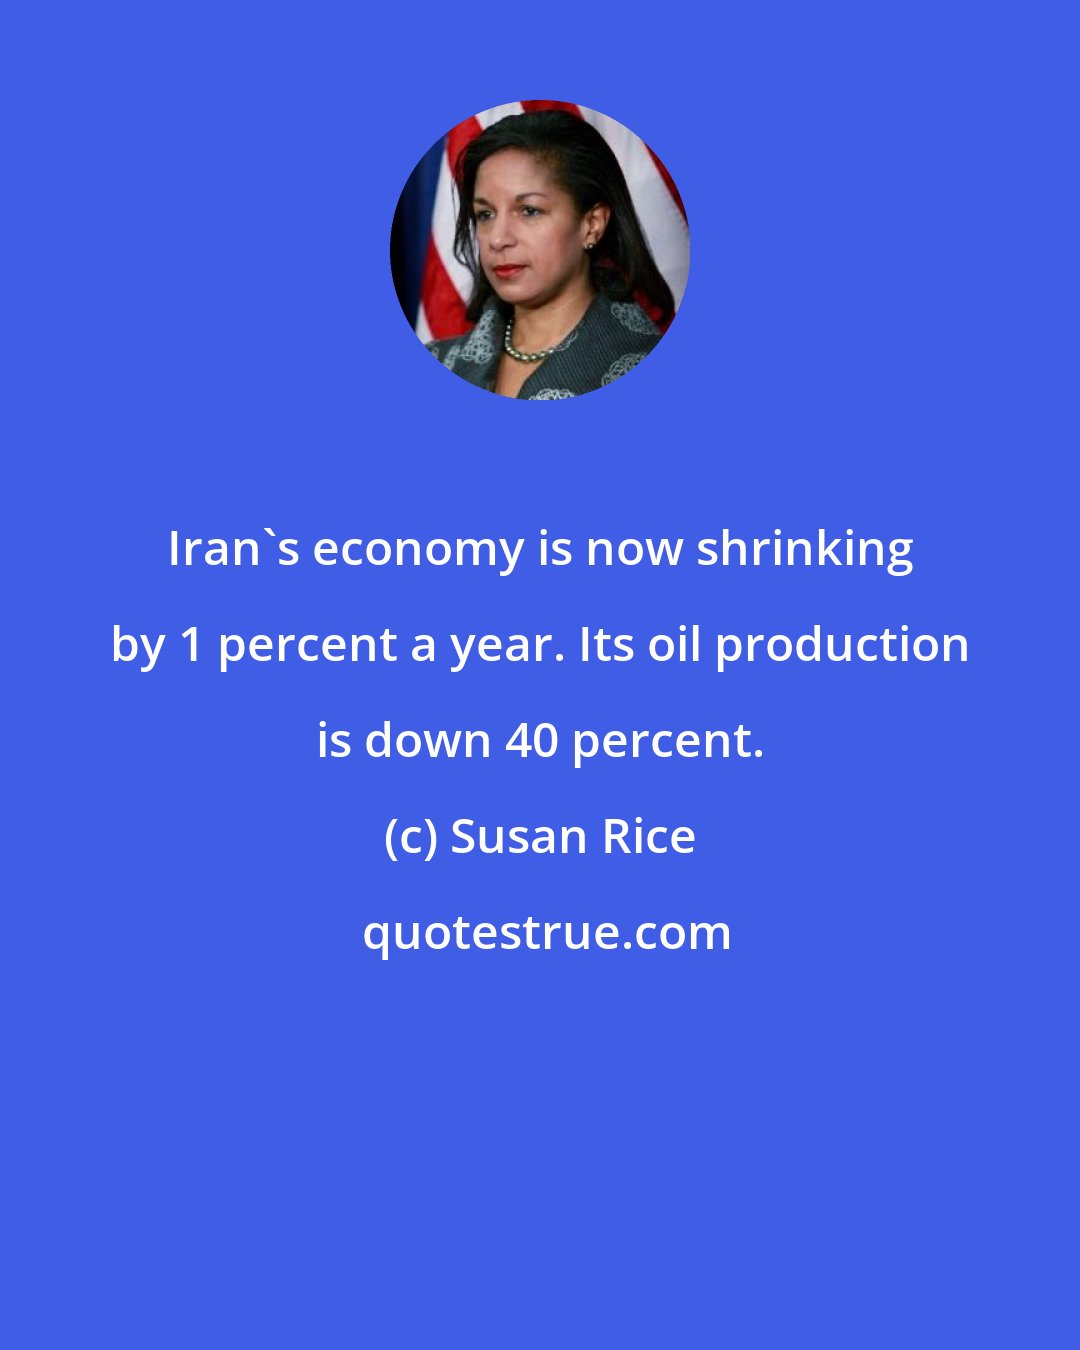 Susan Rice: Iran's economy is now shrinking by 1 percent a year. Its oil production is down 40 percent.